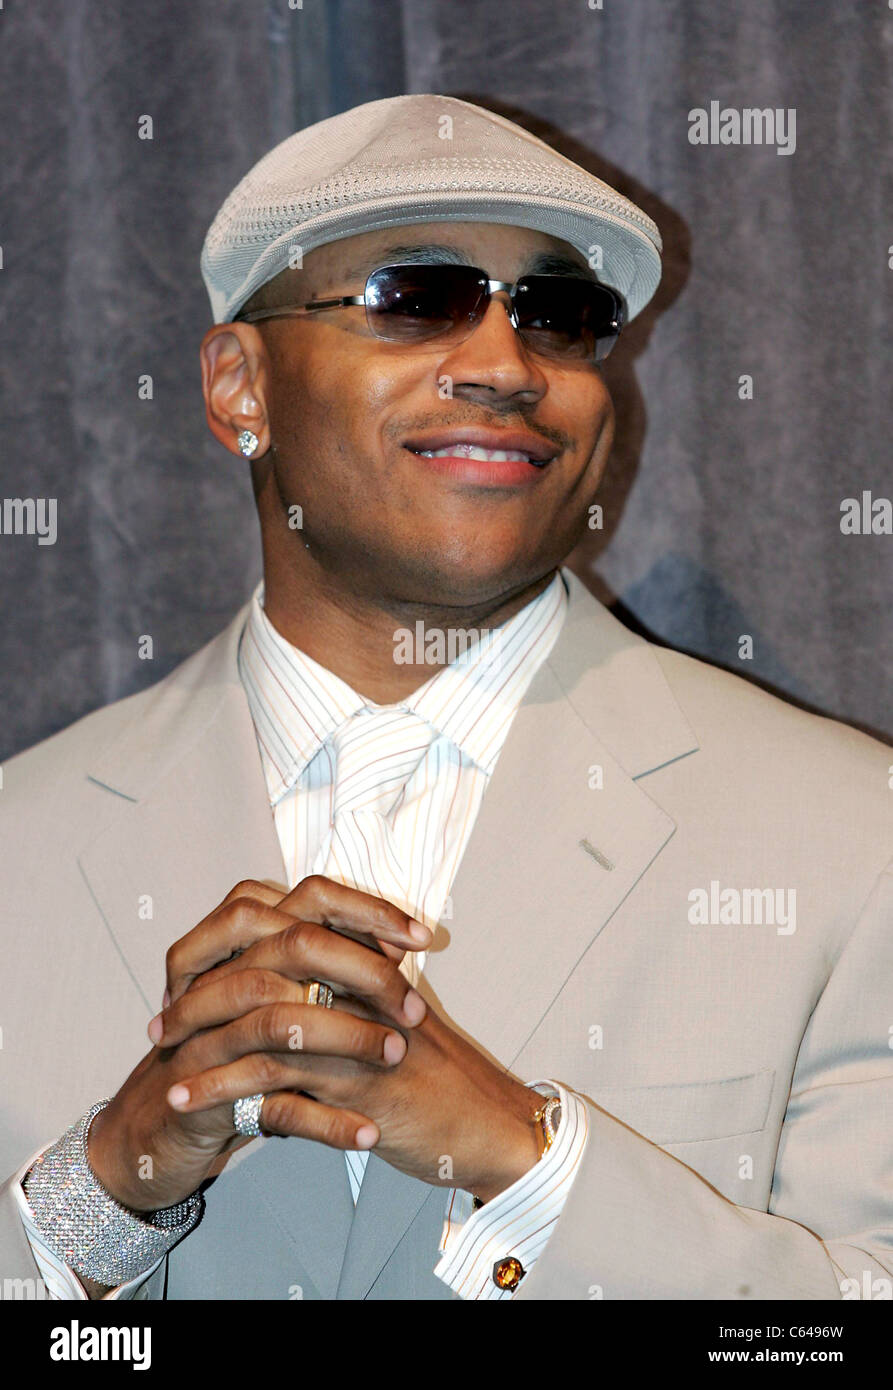 LL Cool J at arrivals for EDISON Premiere at Toronto Film Festival, Roy